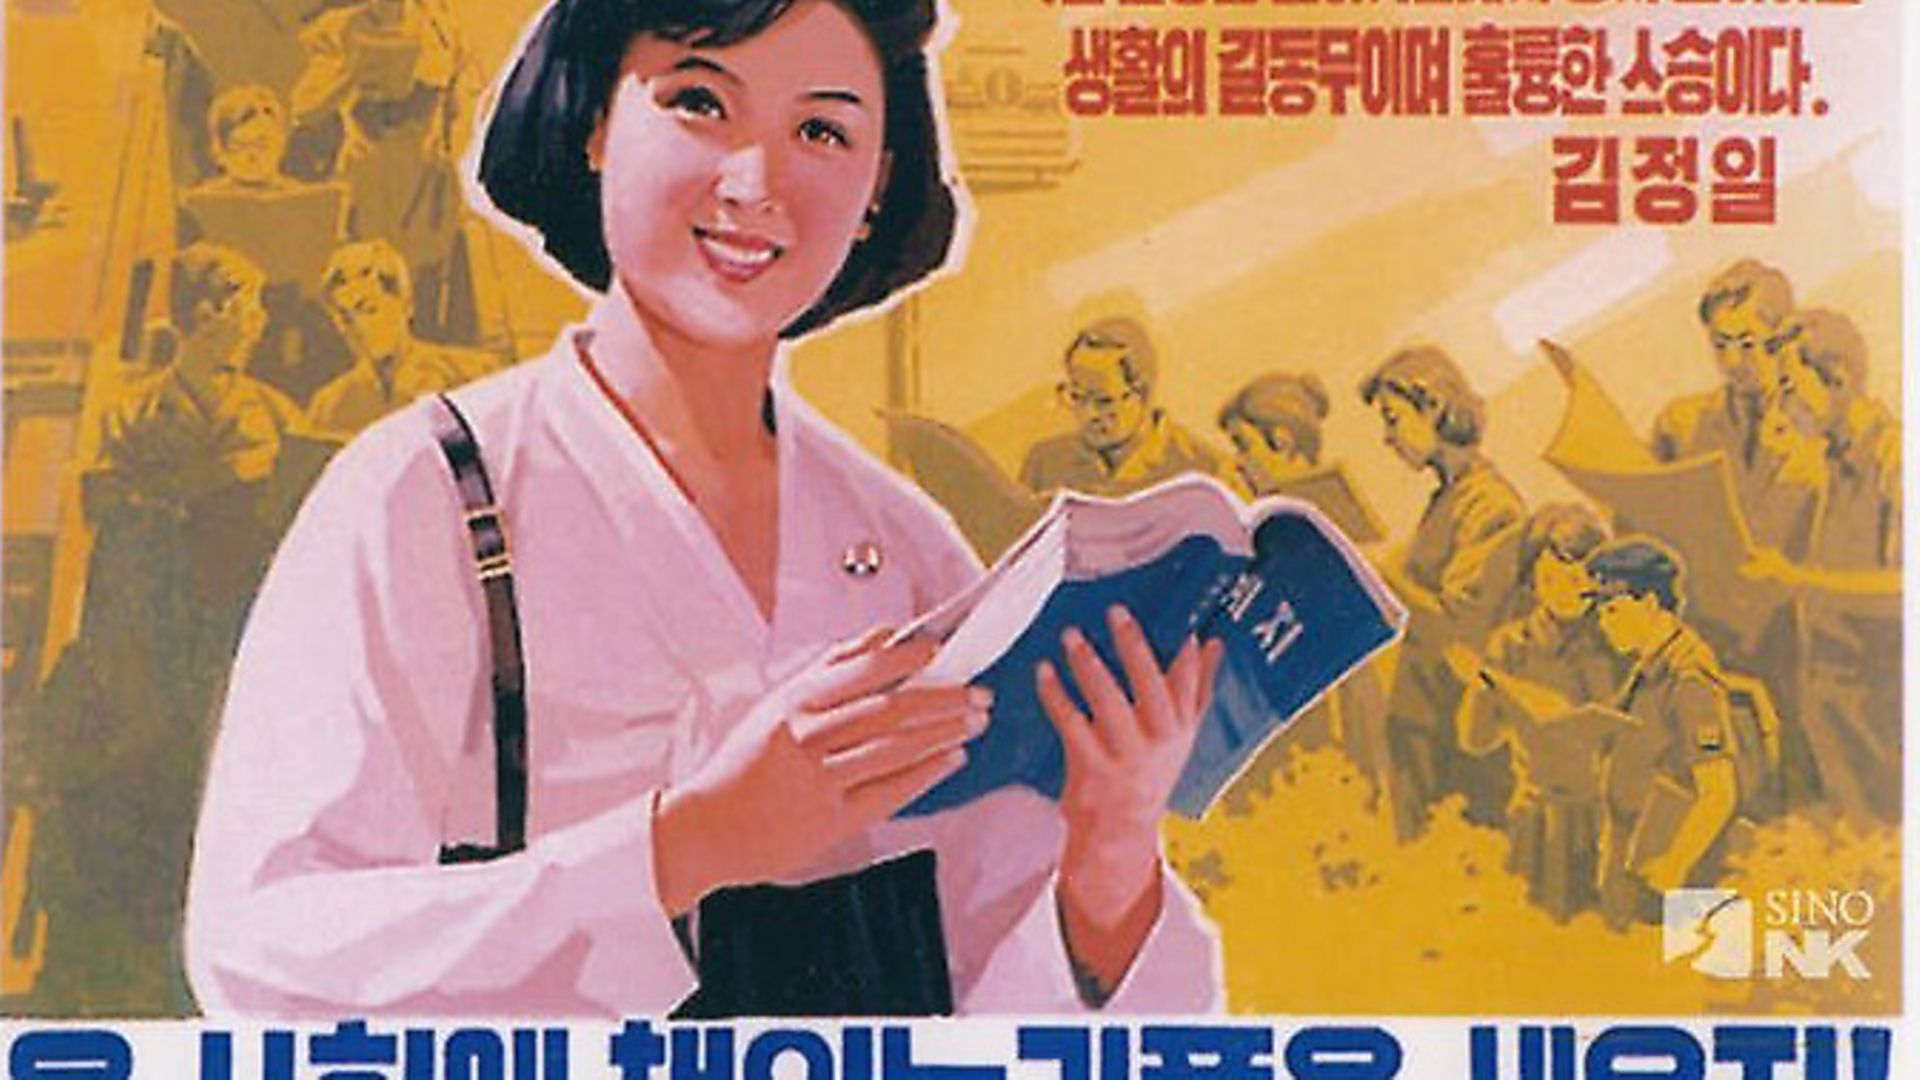 A North Korean propaganda image proclaims 'let's establish the habit of reading all over the country!' - Credit: Archant